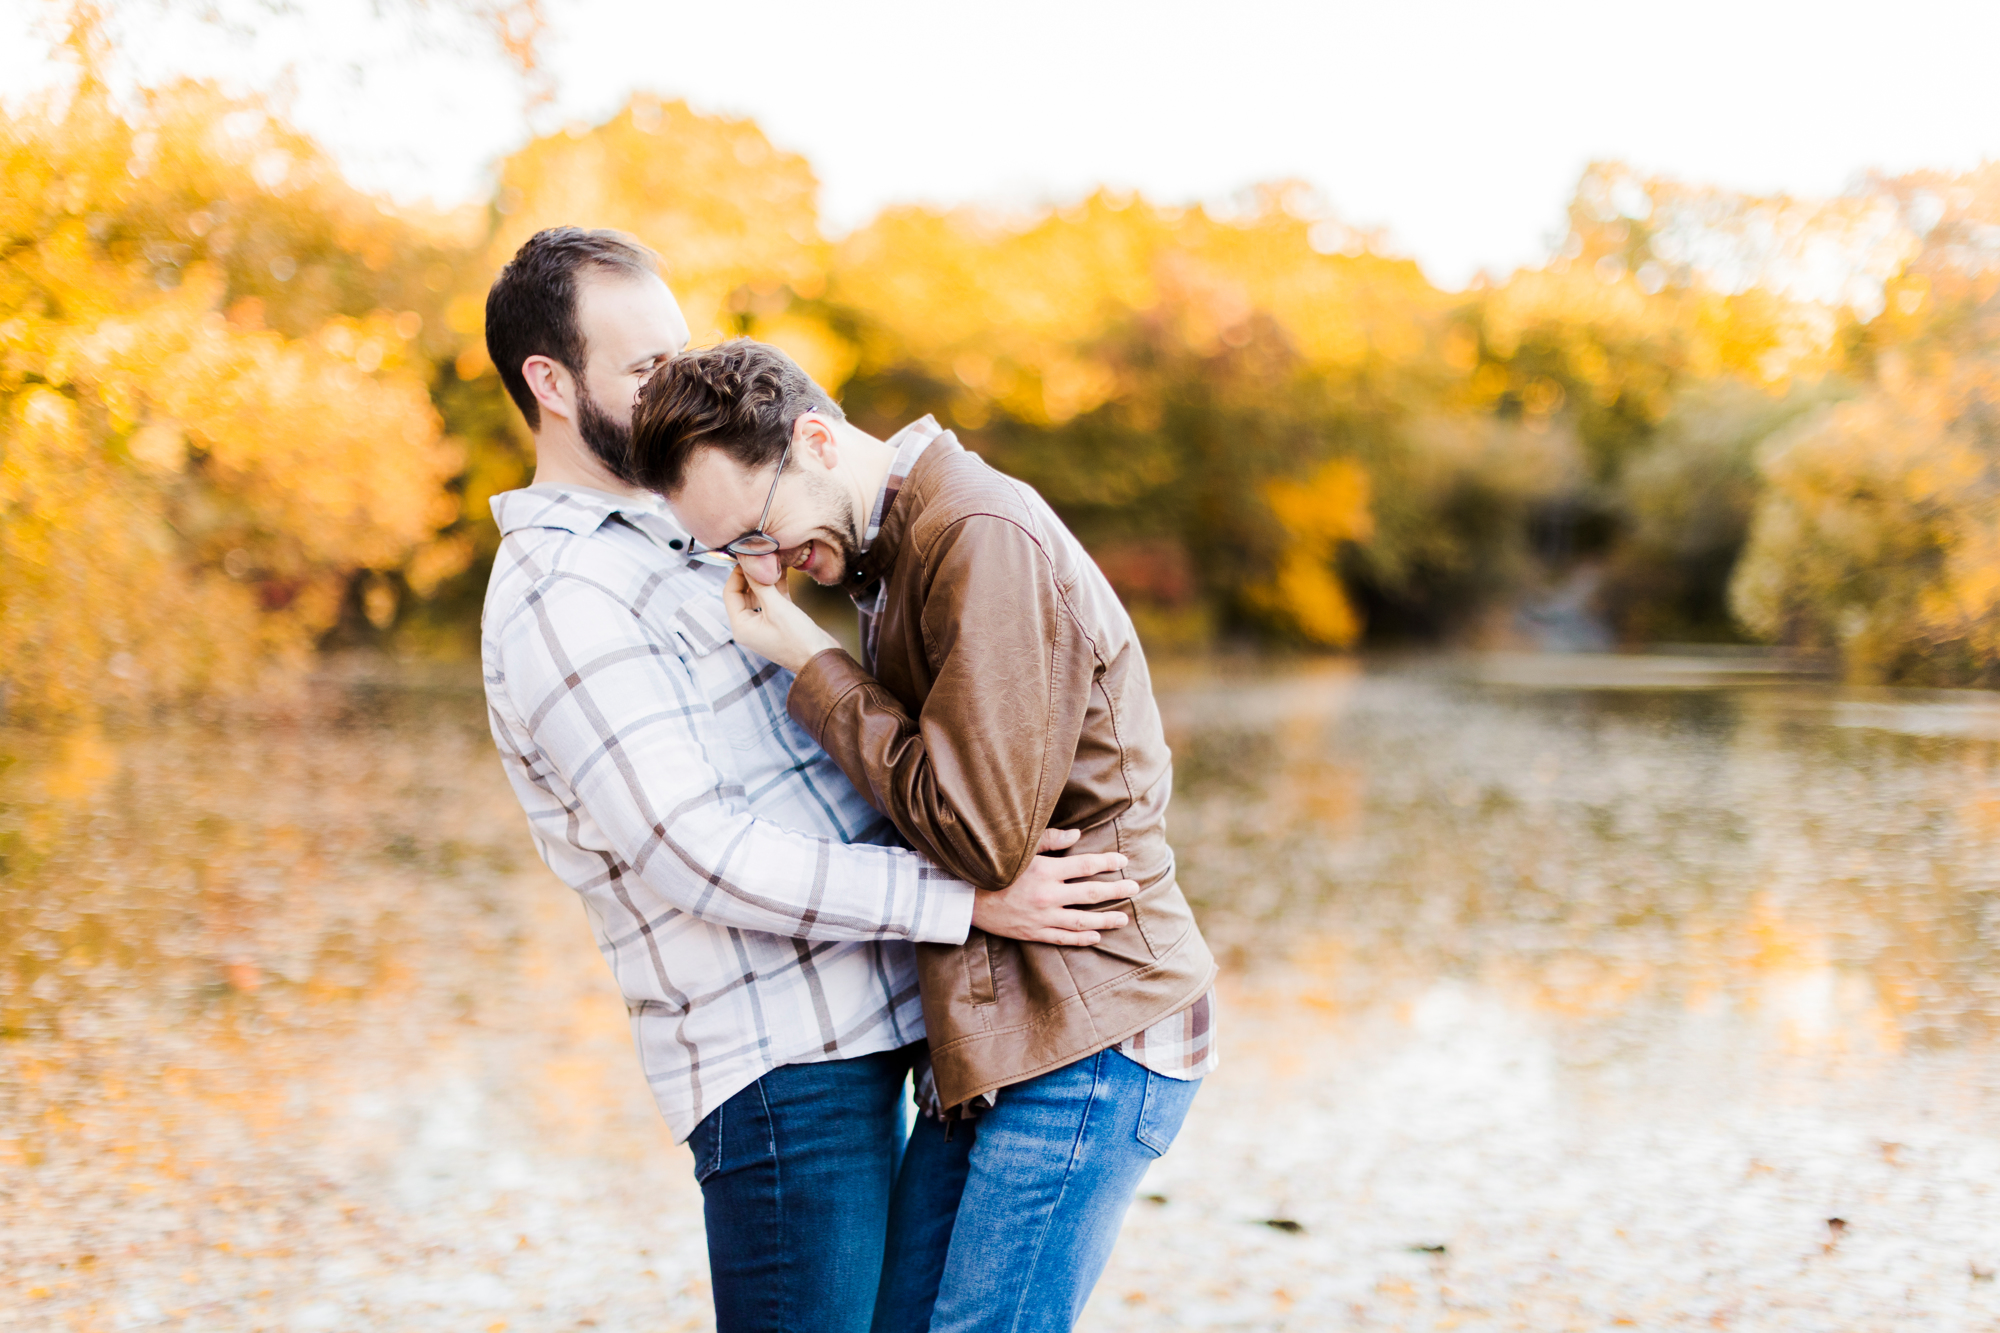 Vibrant Engagement Photo Shoot in Central Park